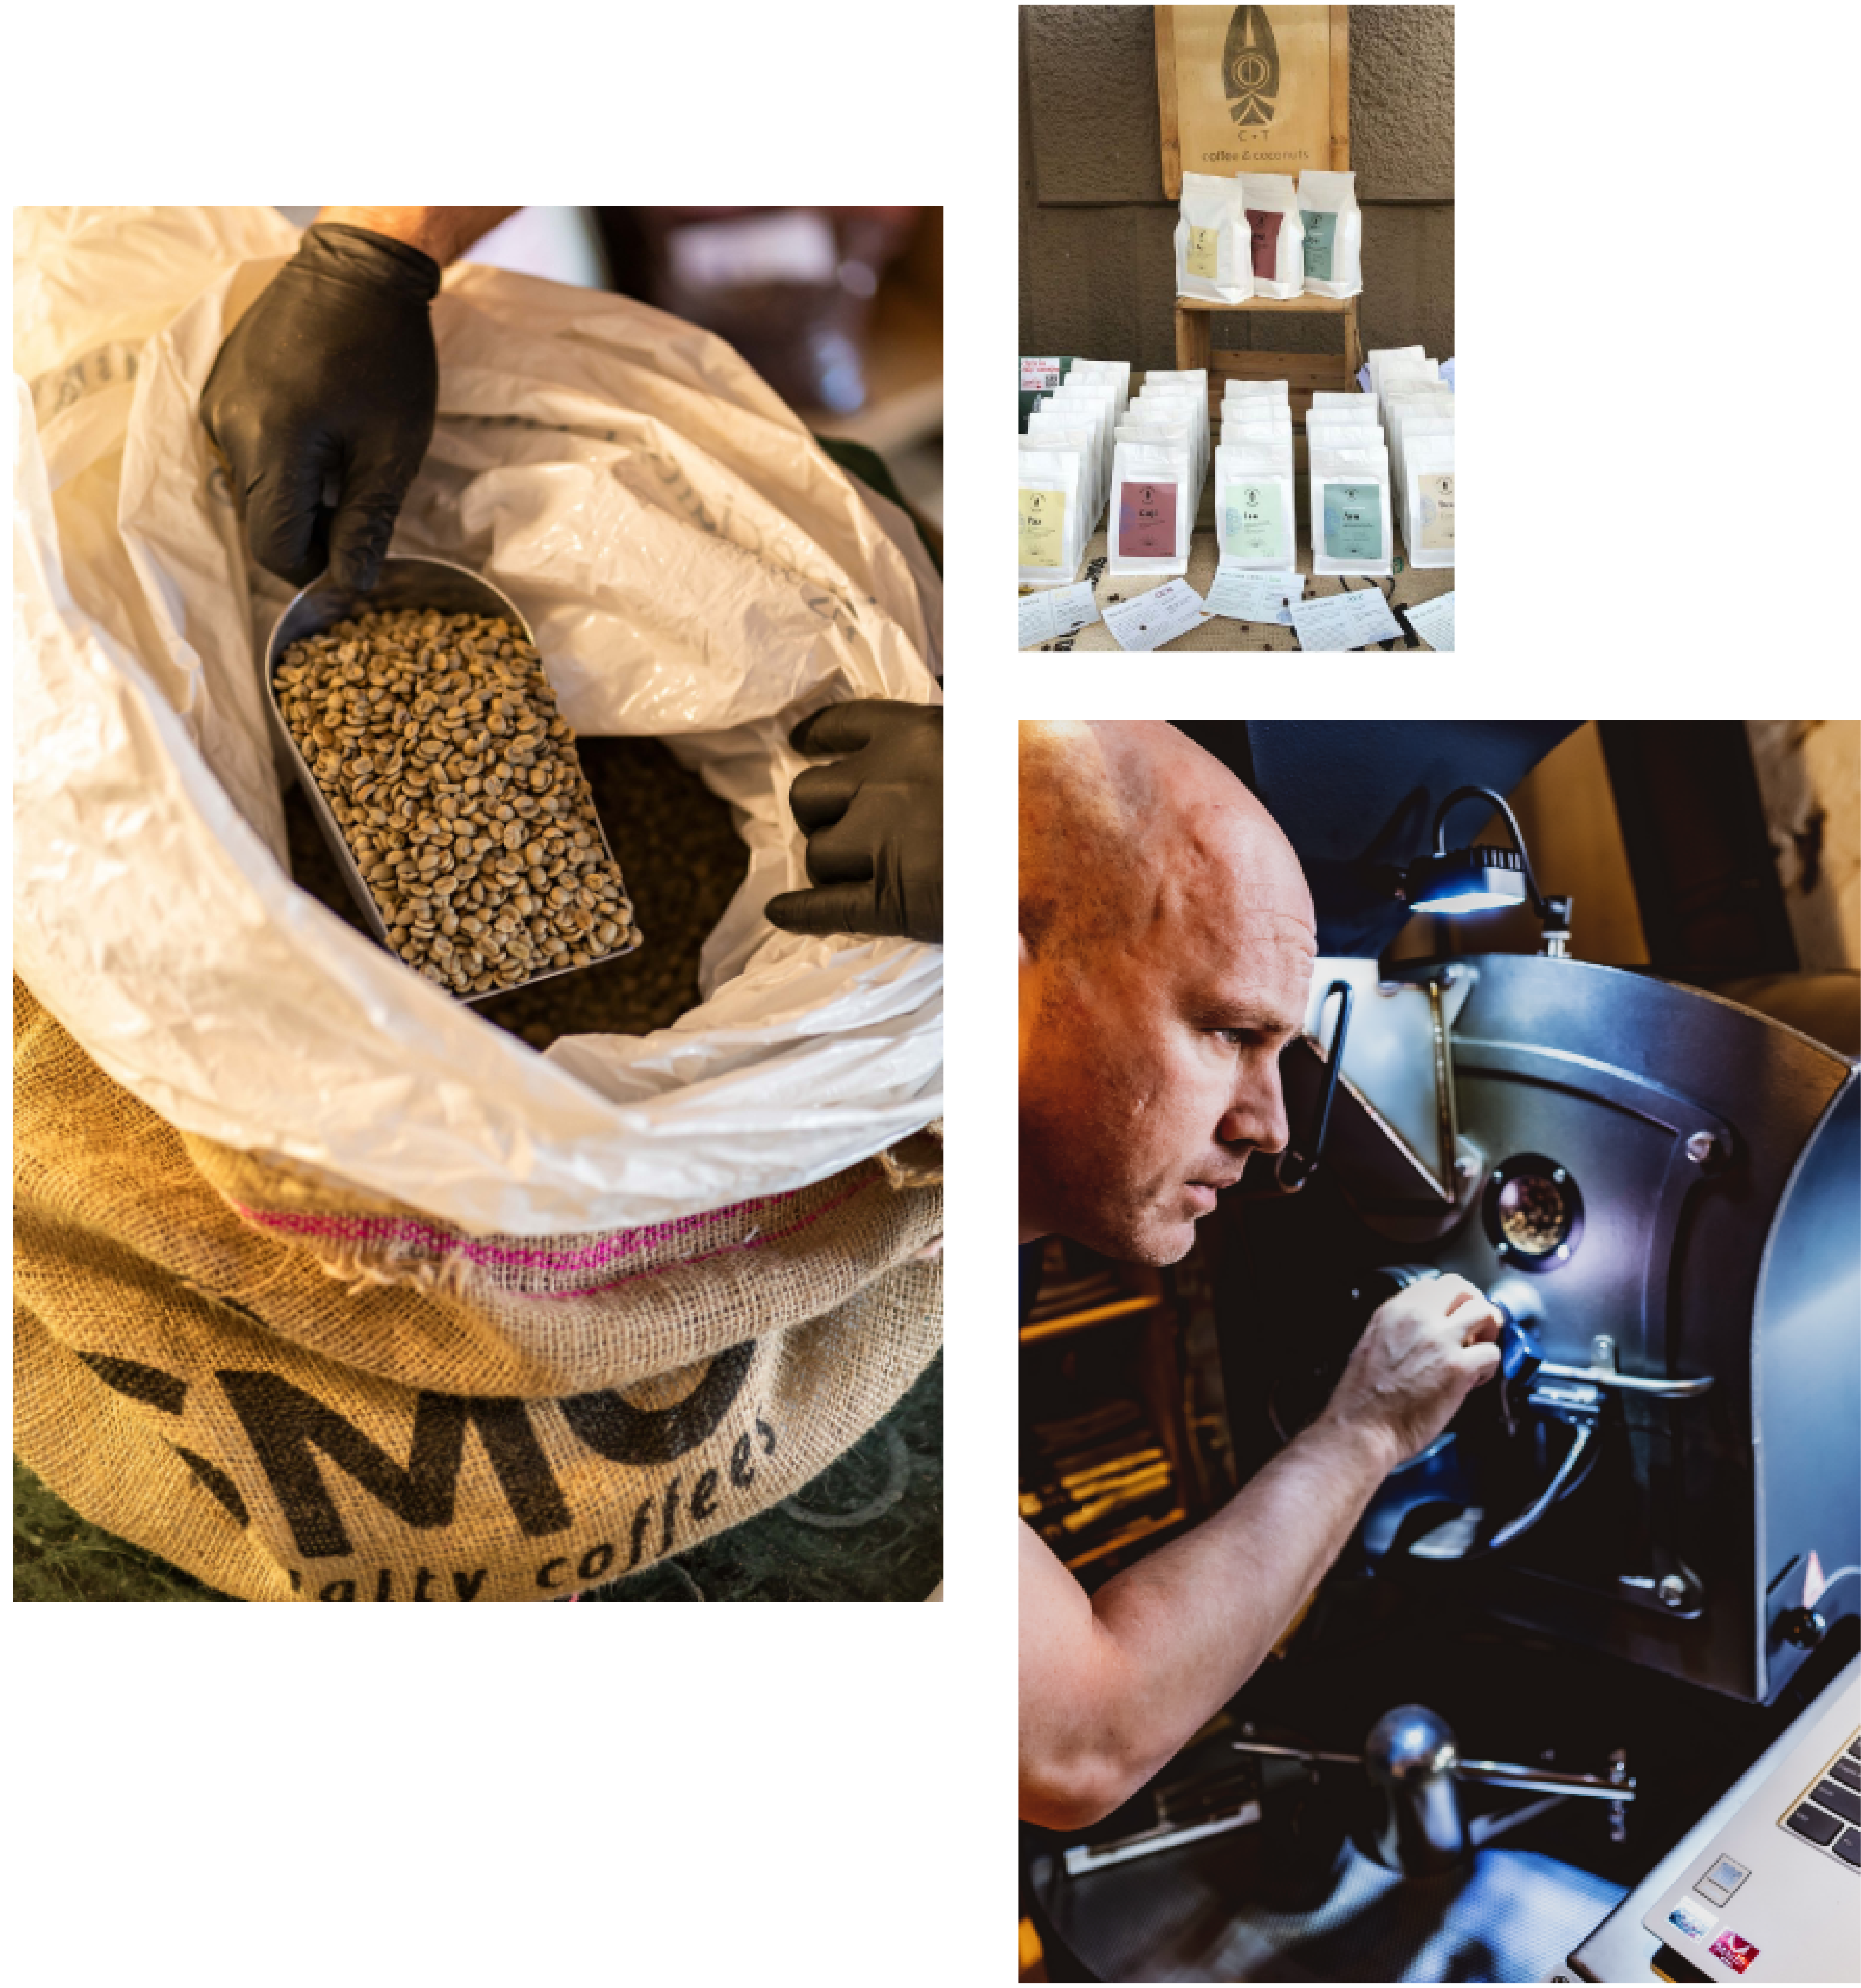 Pictures of the roastery